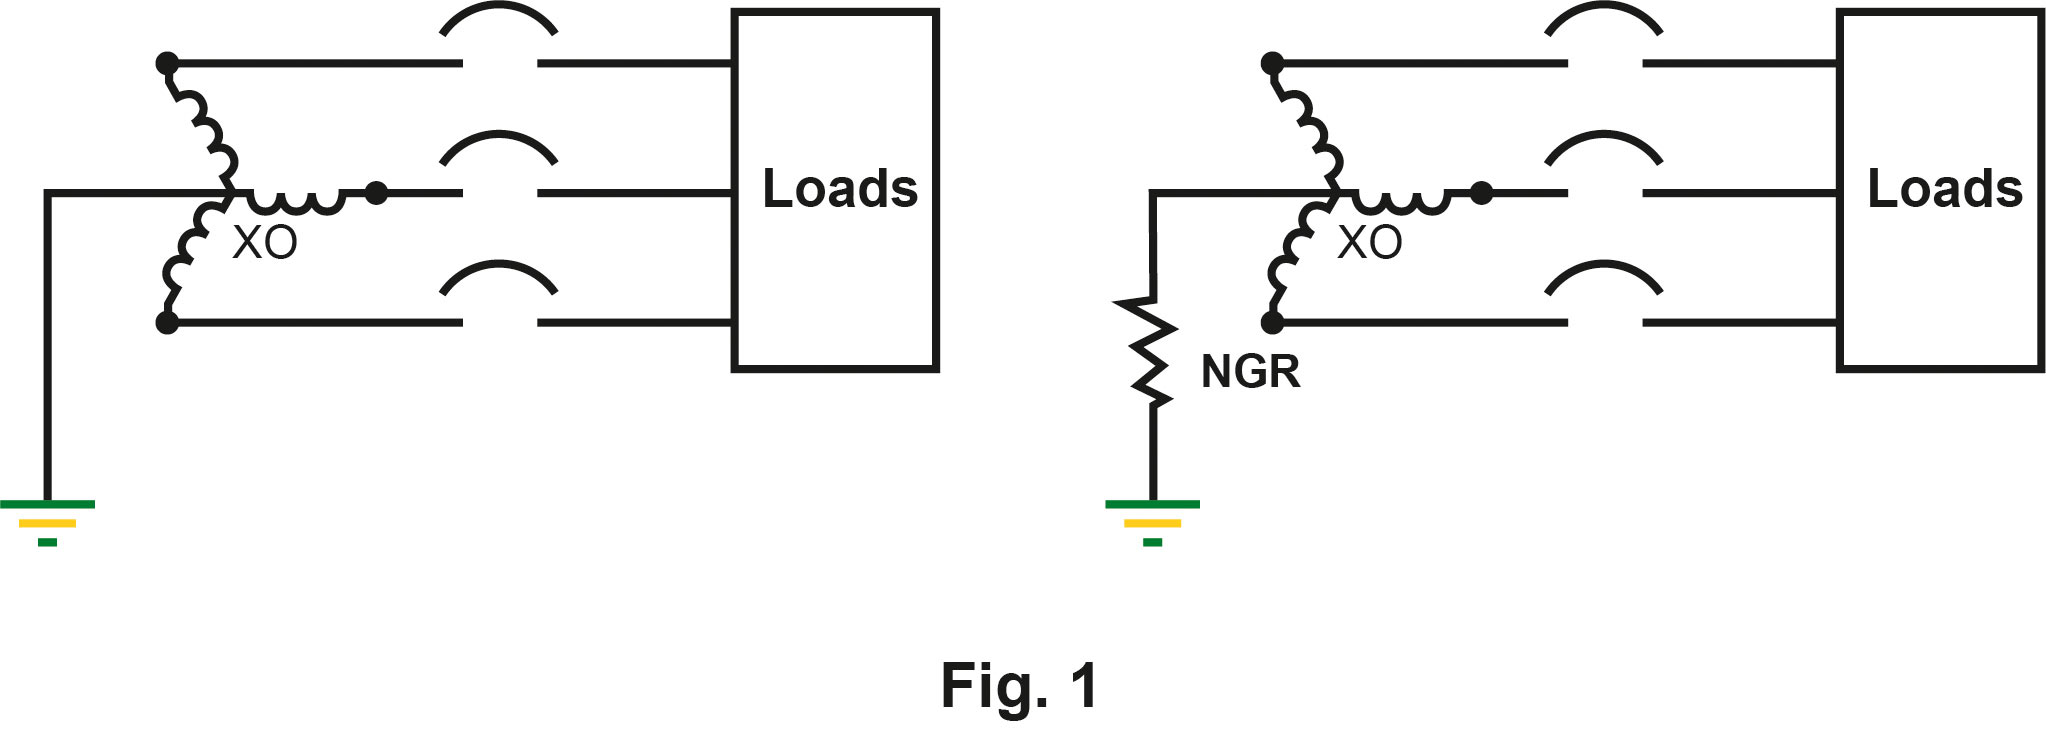 Graphic-Grounding-System-with-without-NGR